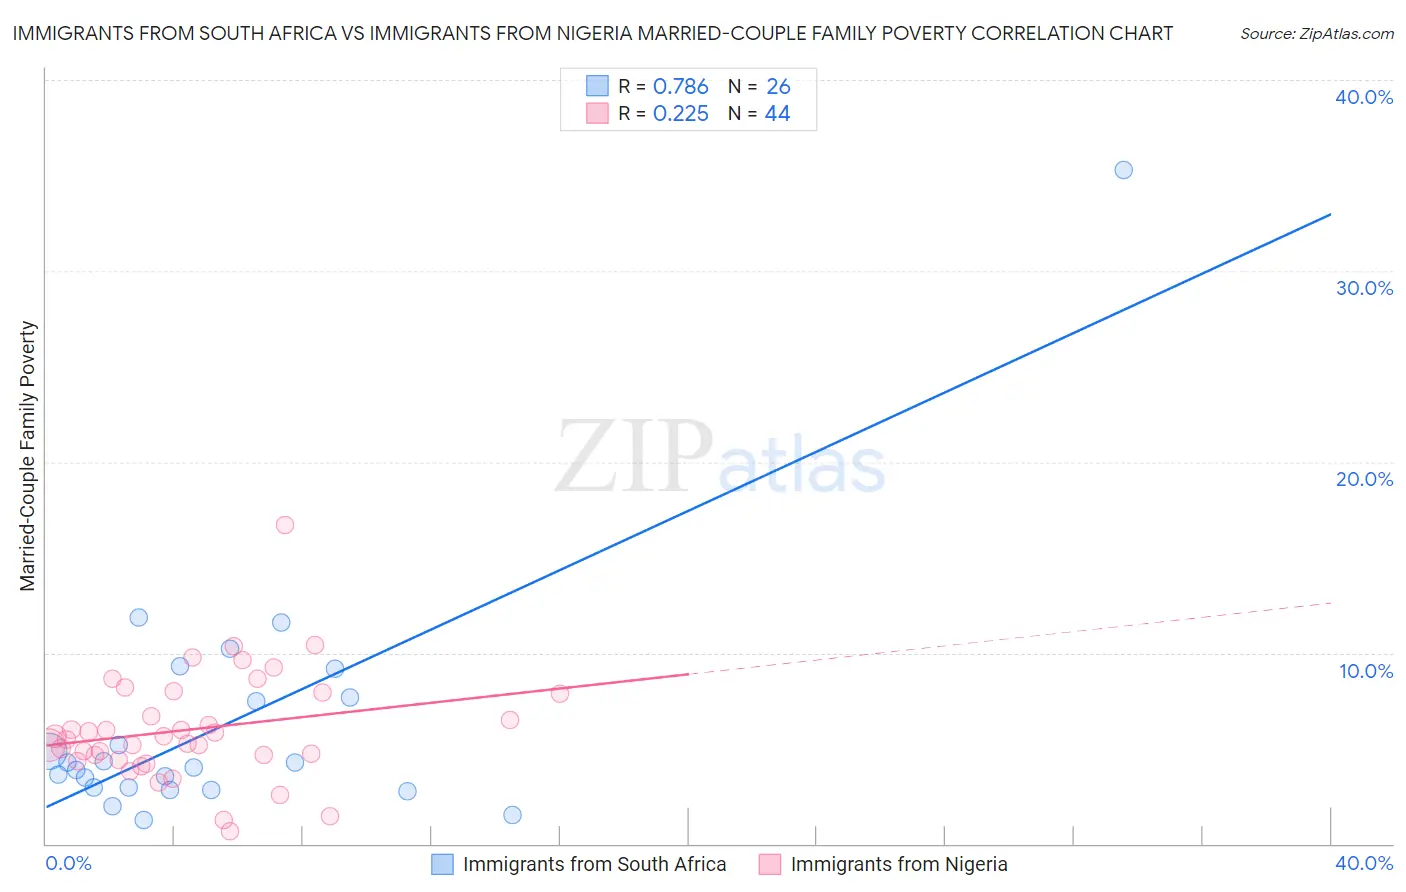 Immigrants from South Africa vs Immigrants from Nigeria Married-Couple Family Poverty